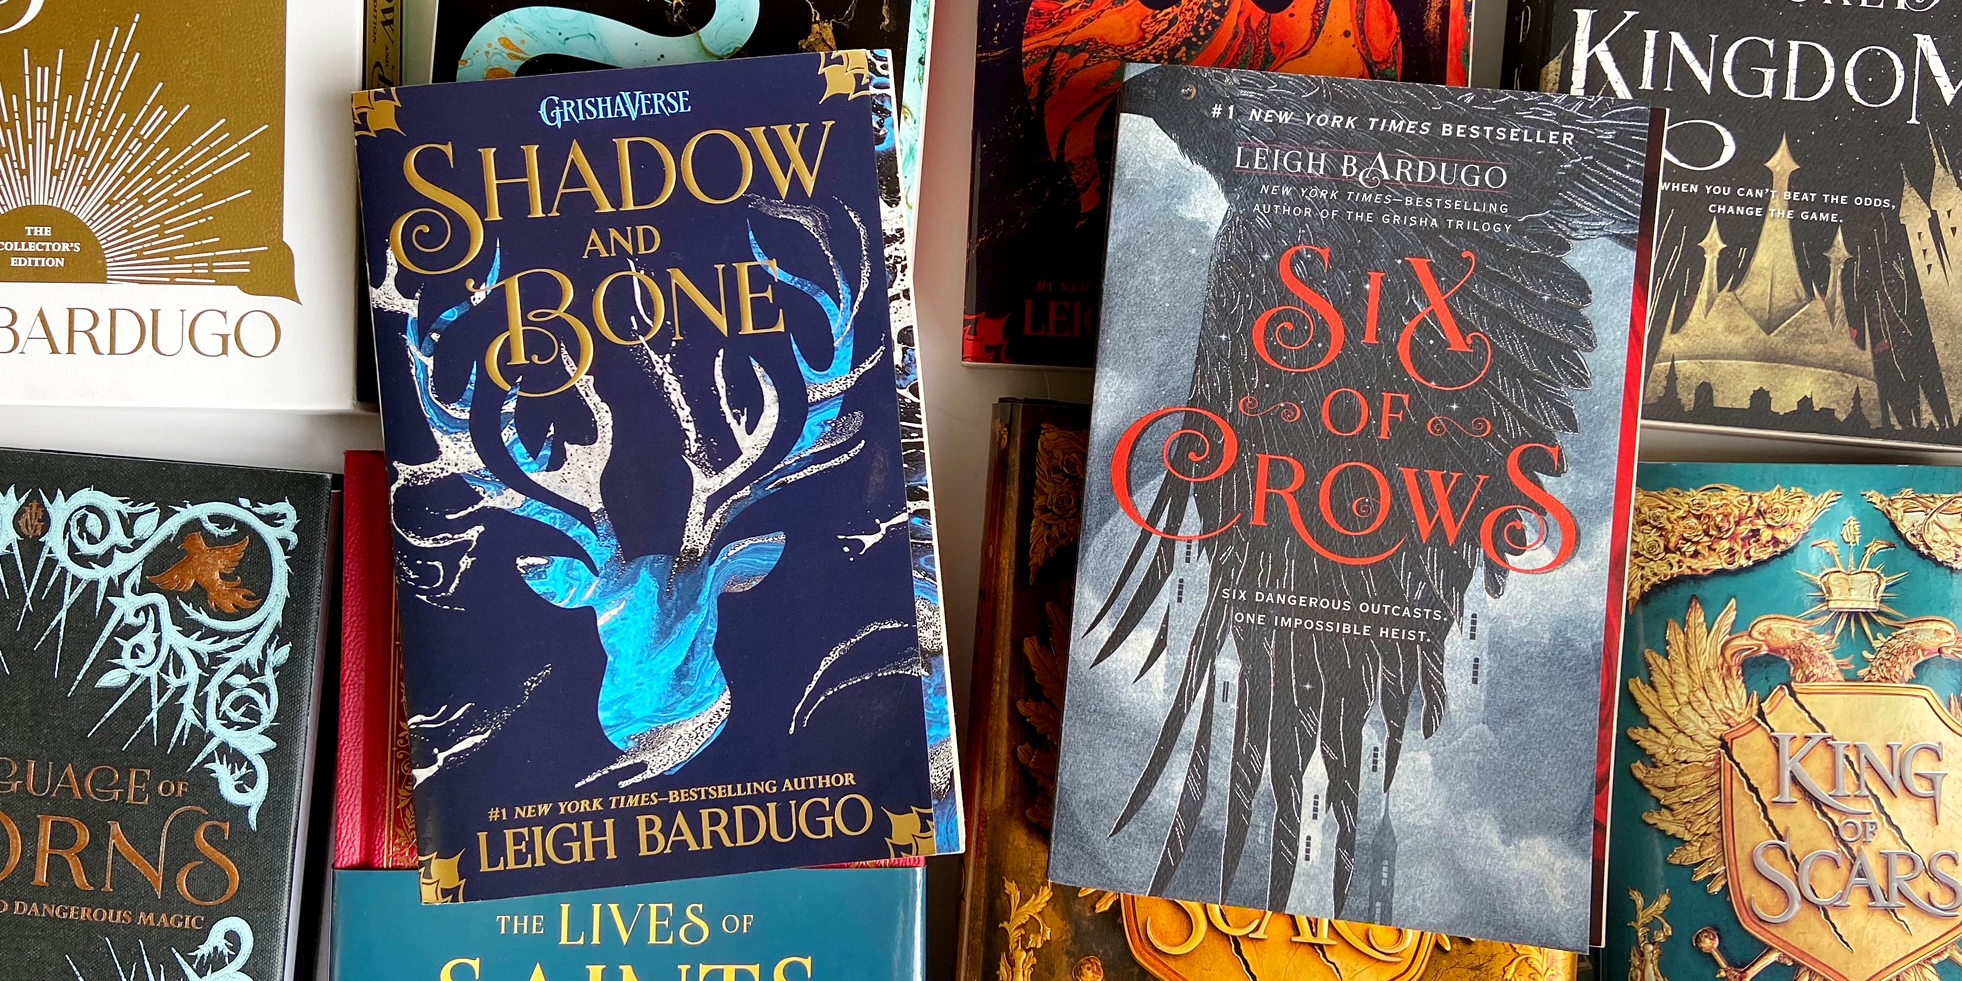 shadow and bone netflix which book